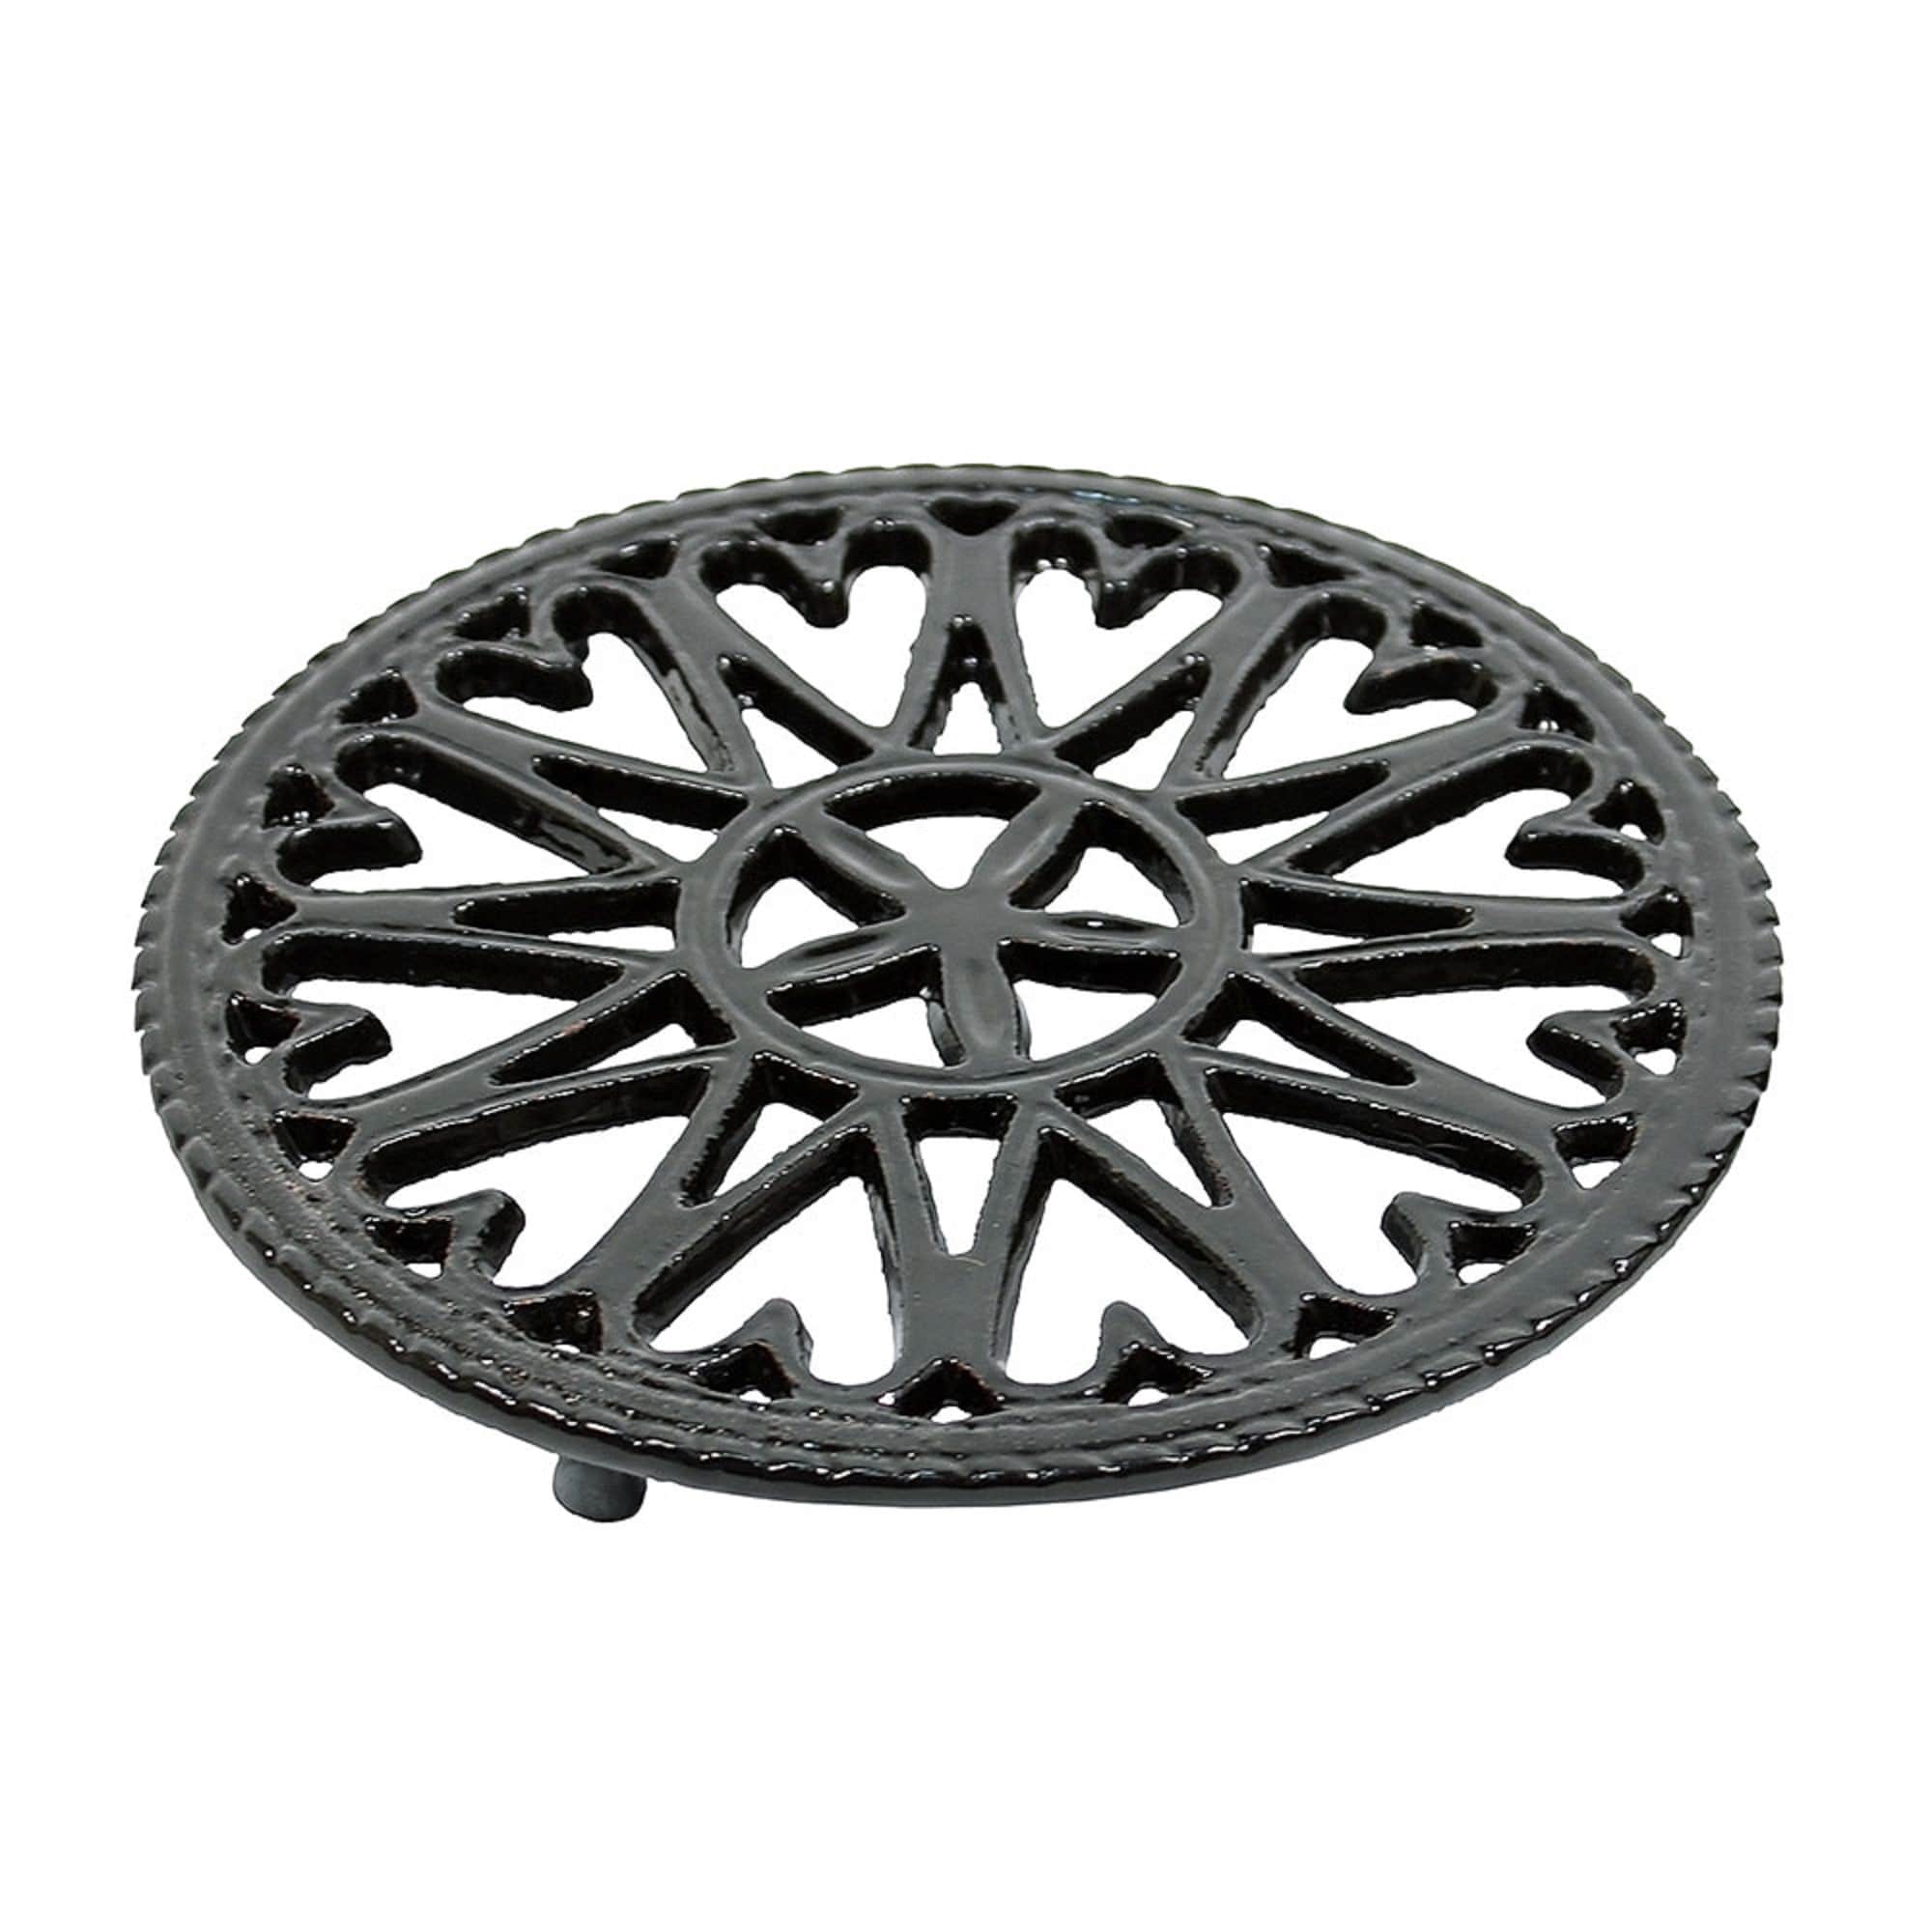 Dutch Oven Foldable Camp Cooking Trivet , Hand Forged, Free Shipping 